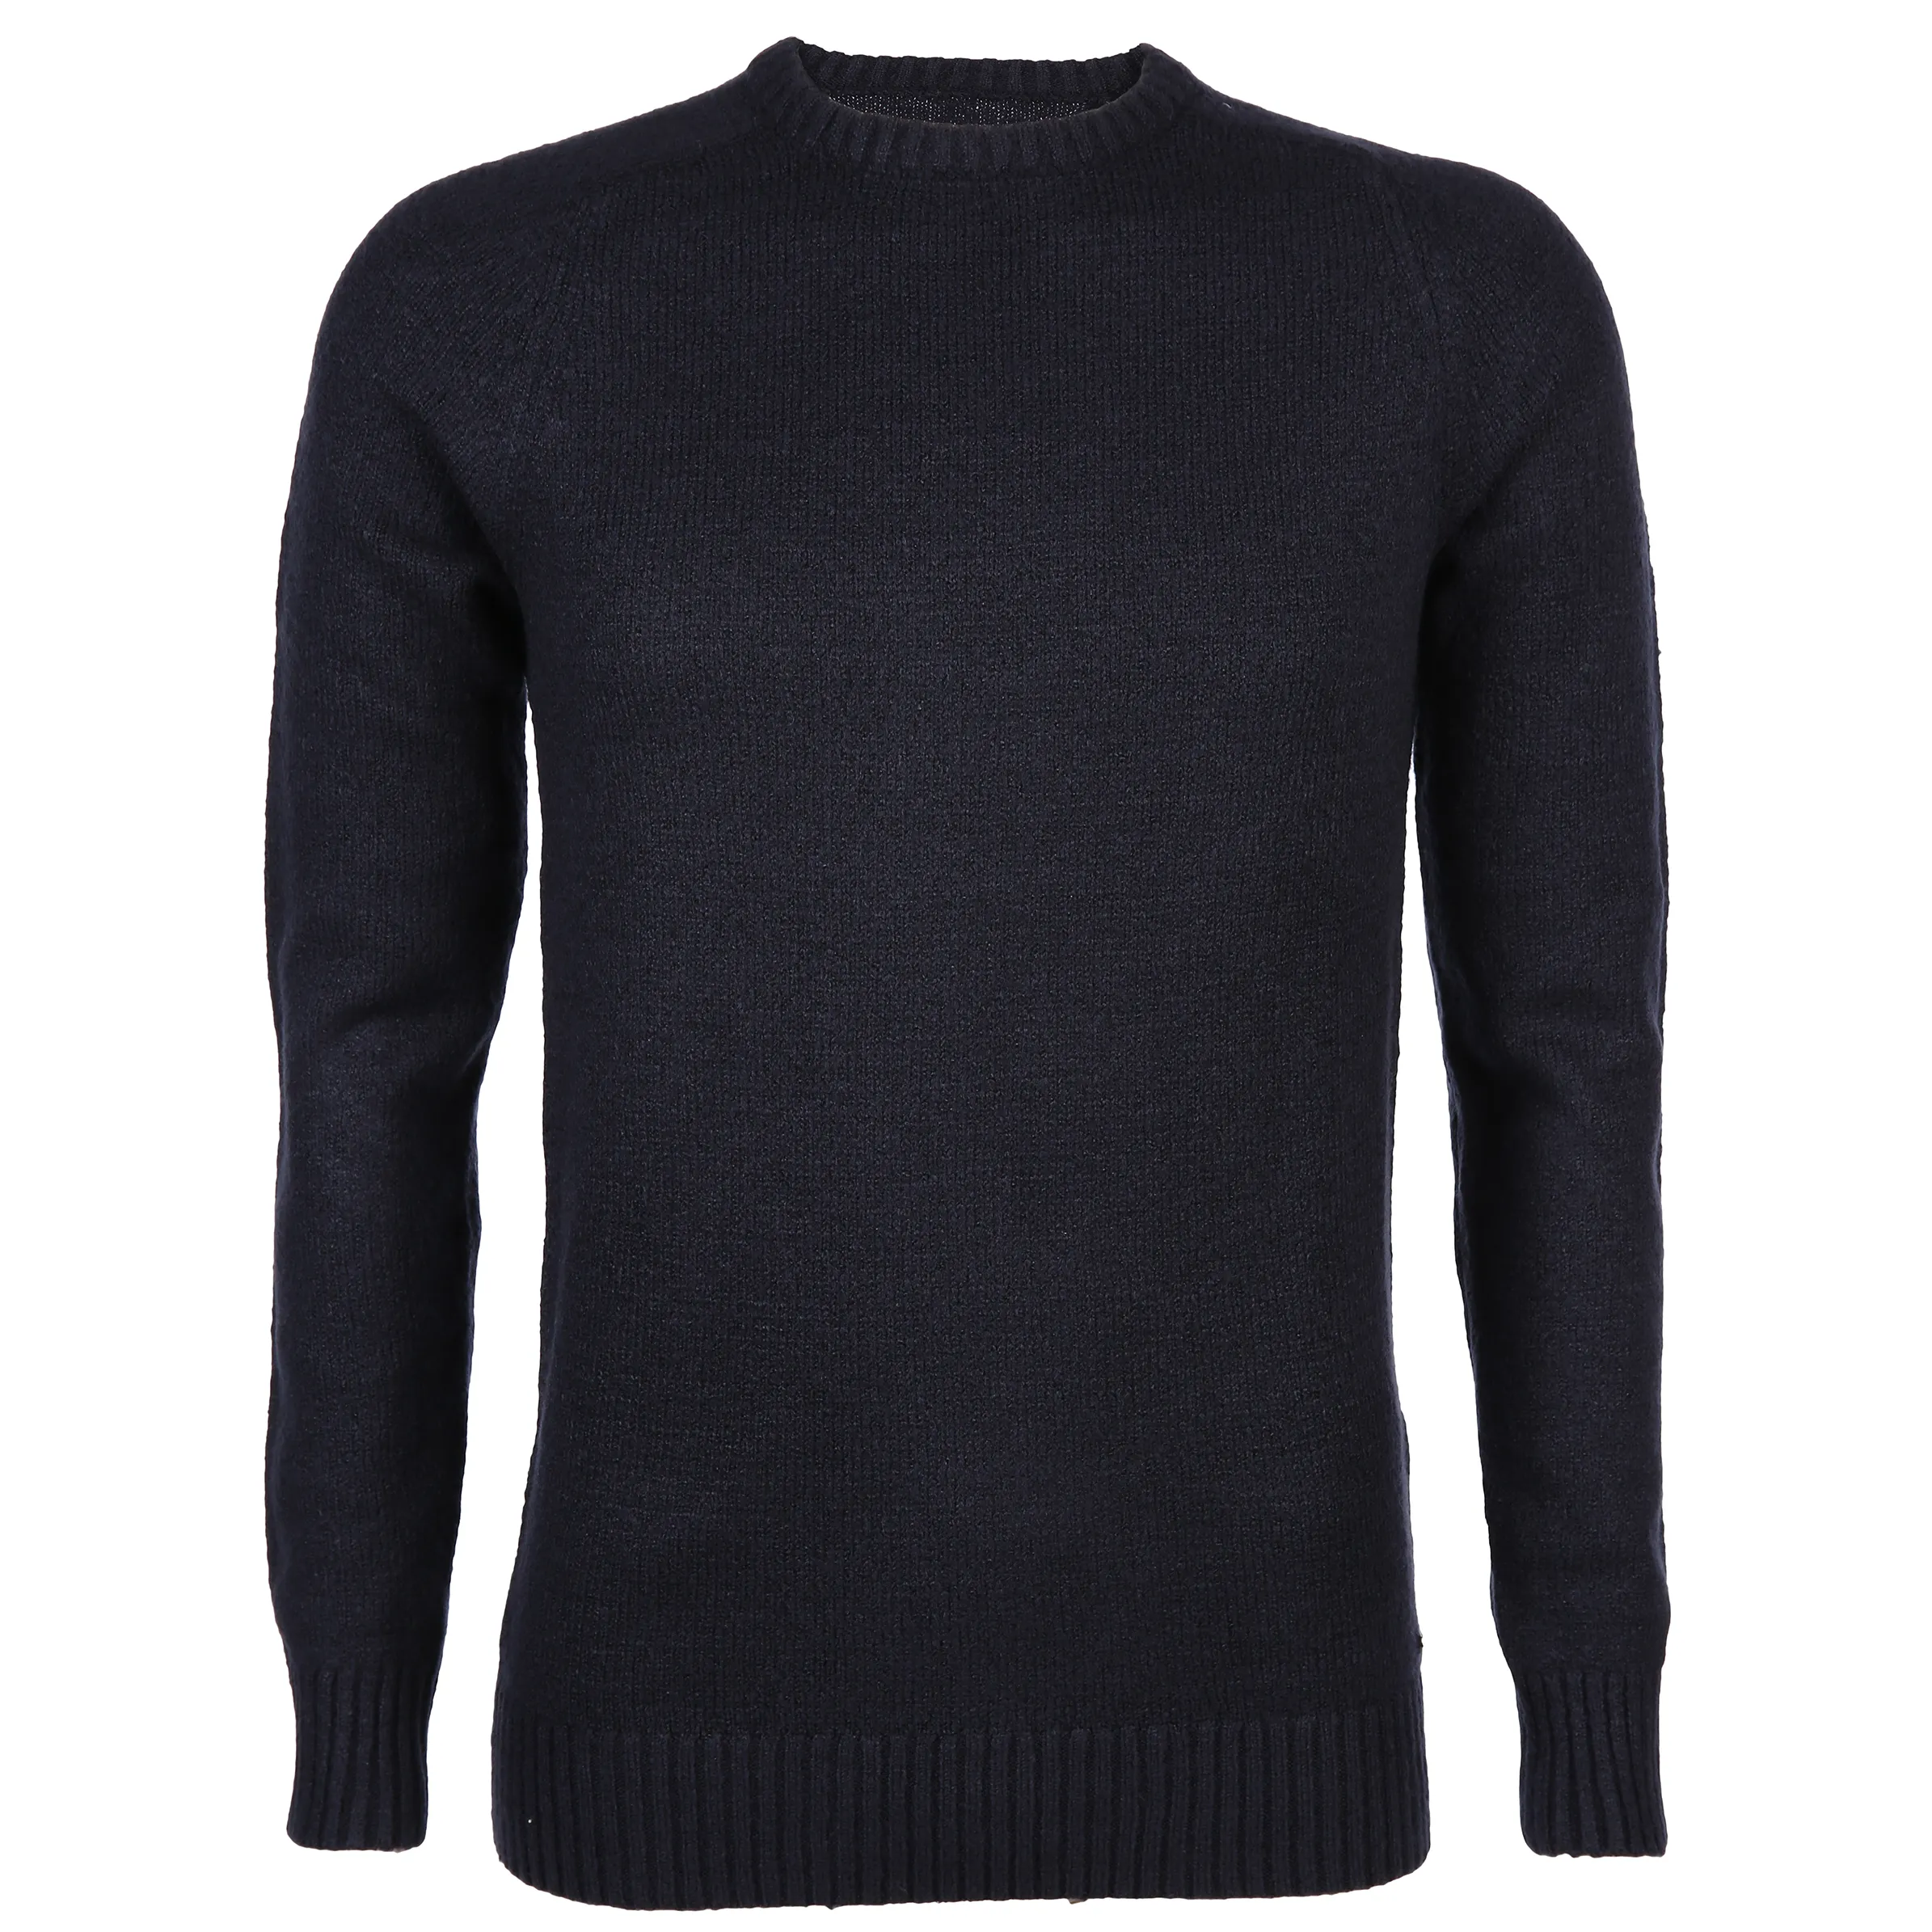 Tom Tailor 1005645 cosy knitted sweater Blau 800010 10690 1